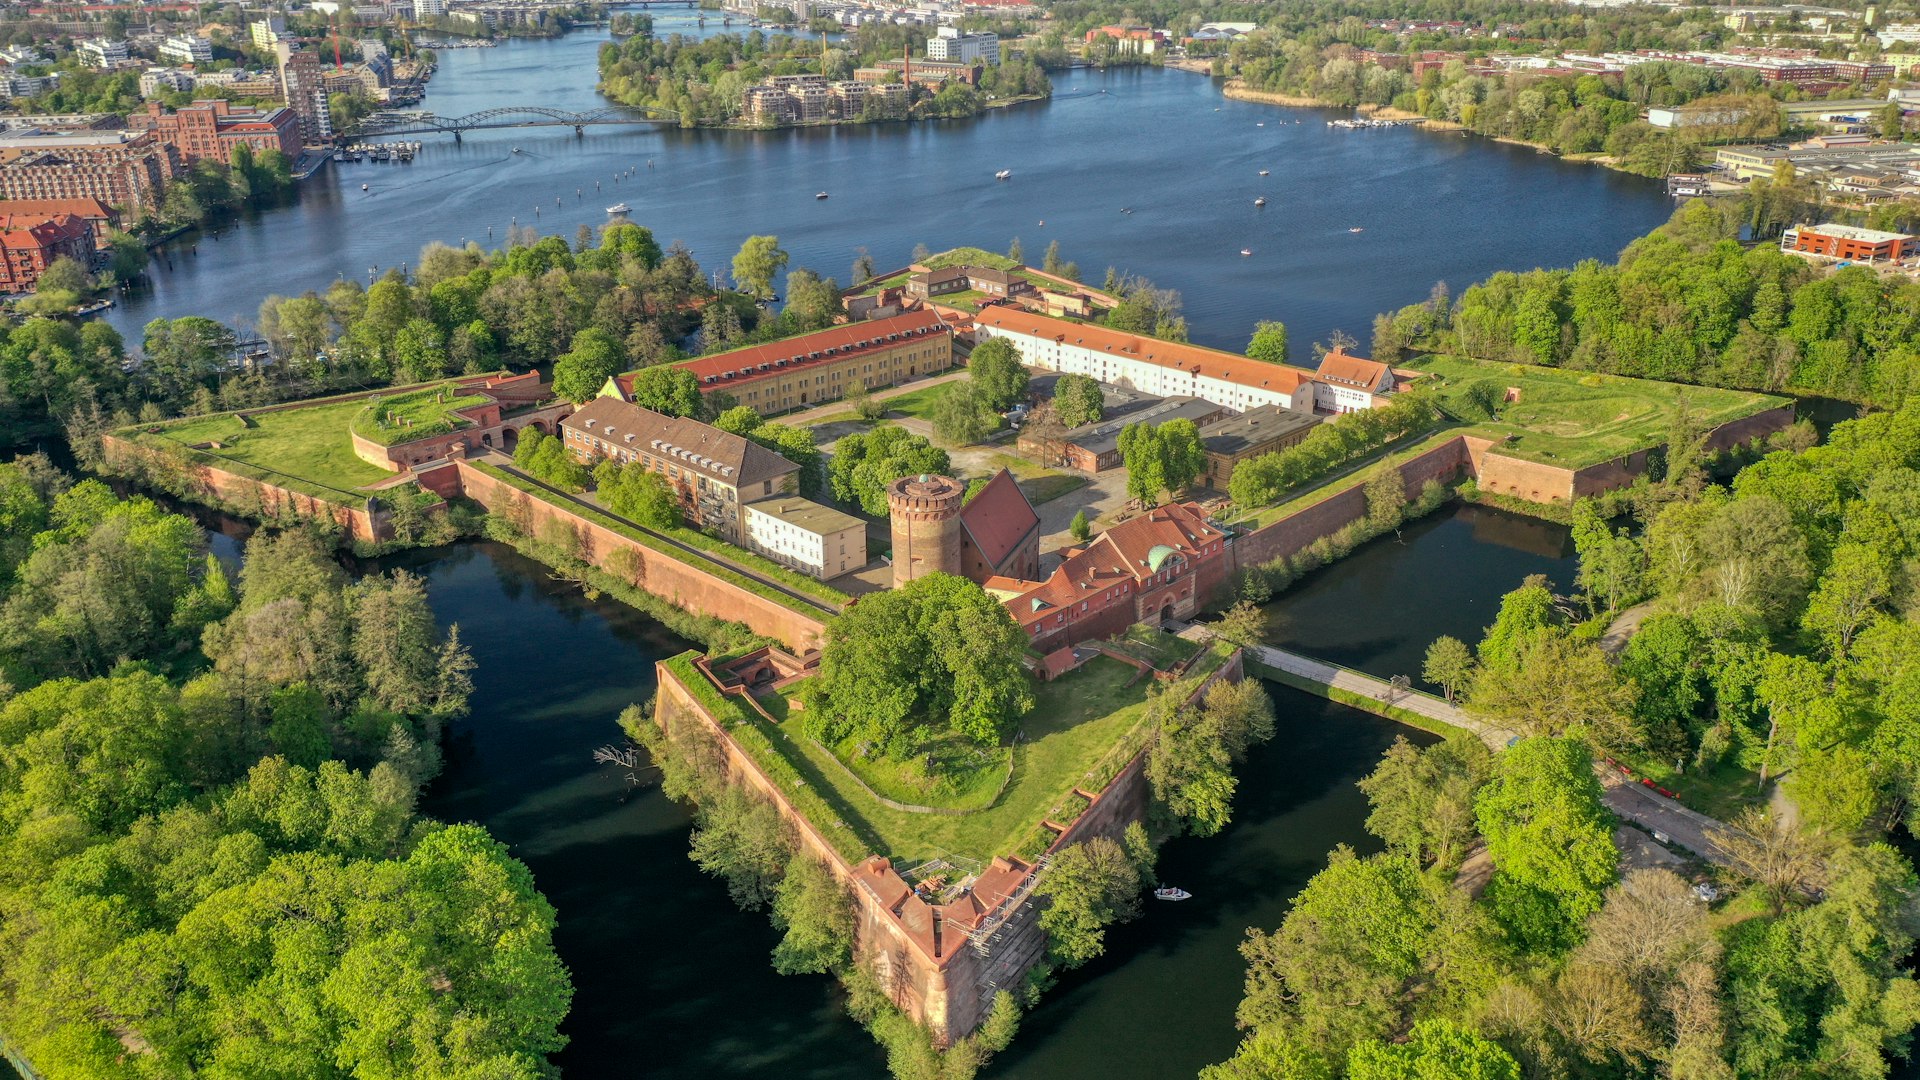 Aerial photo of Citadel Spandau in Berlin, Germany - a large fortress on the water